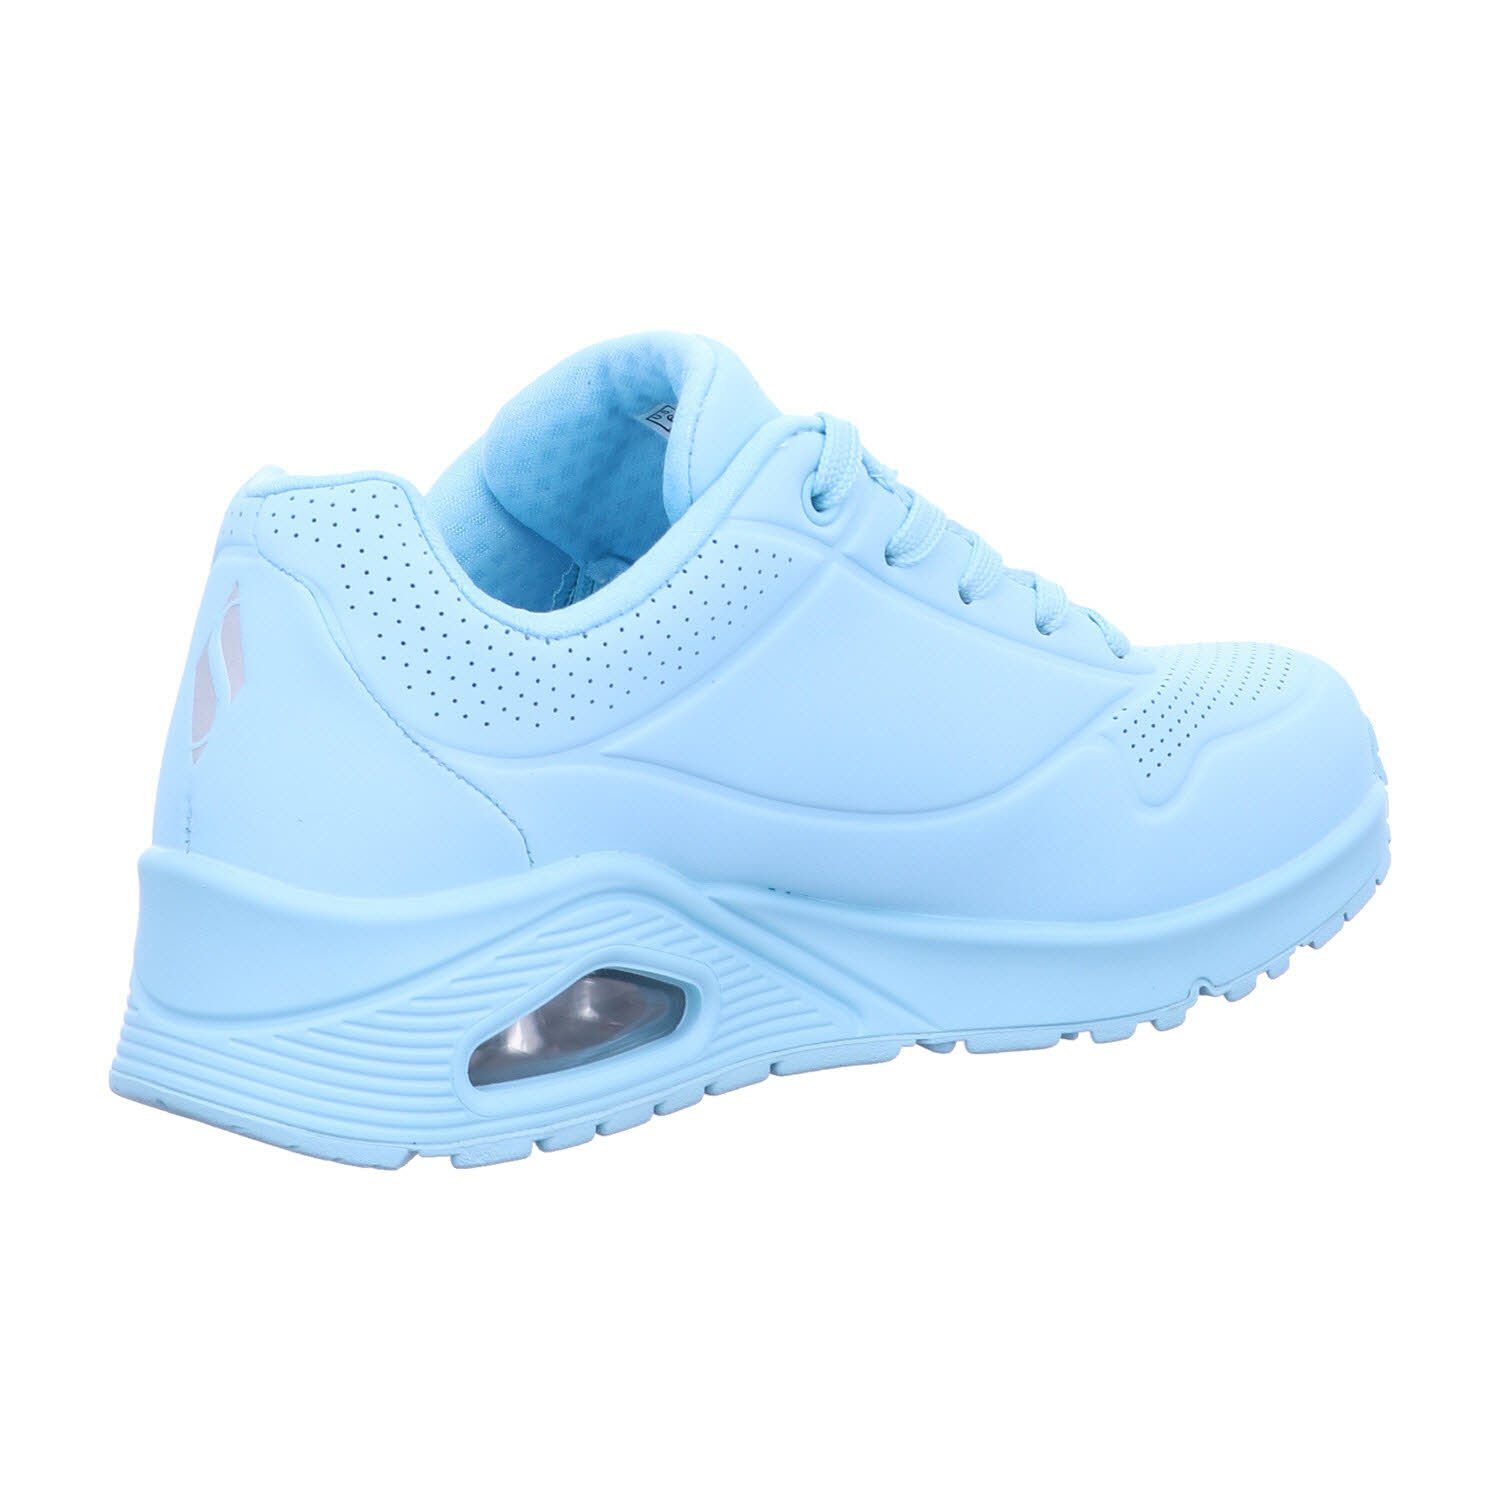 (2-tlg) light AIR blue STAND Skechers - Sneaker UNO ON